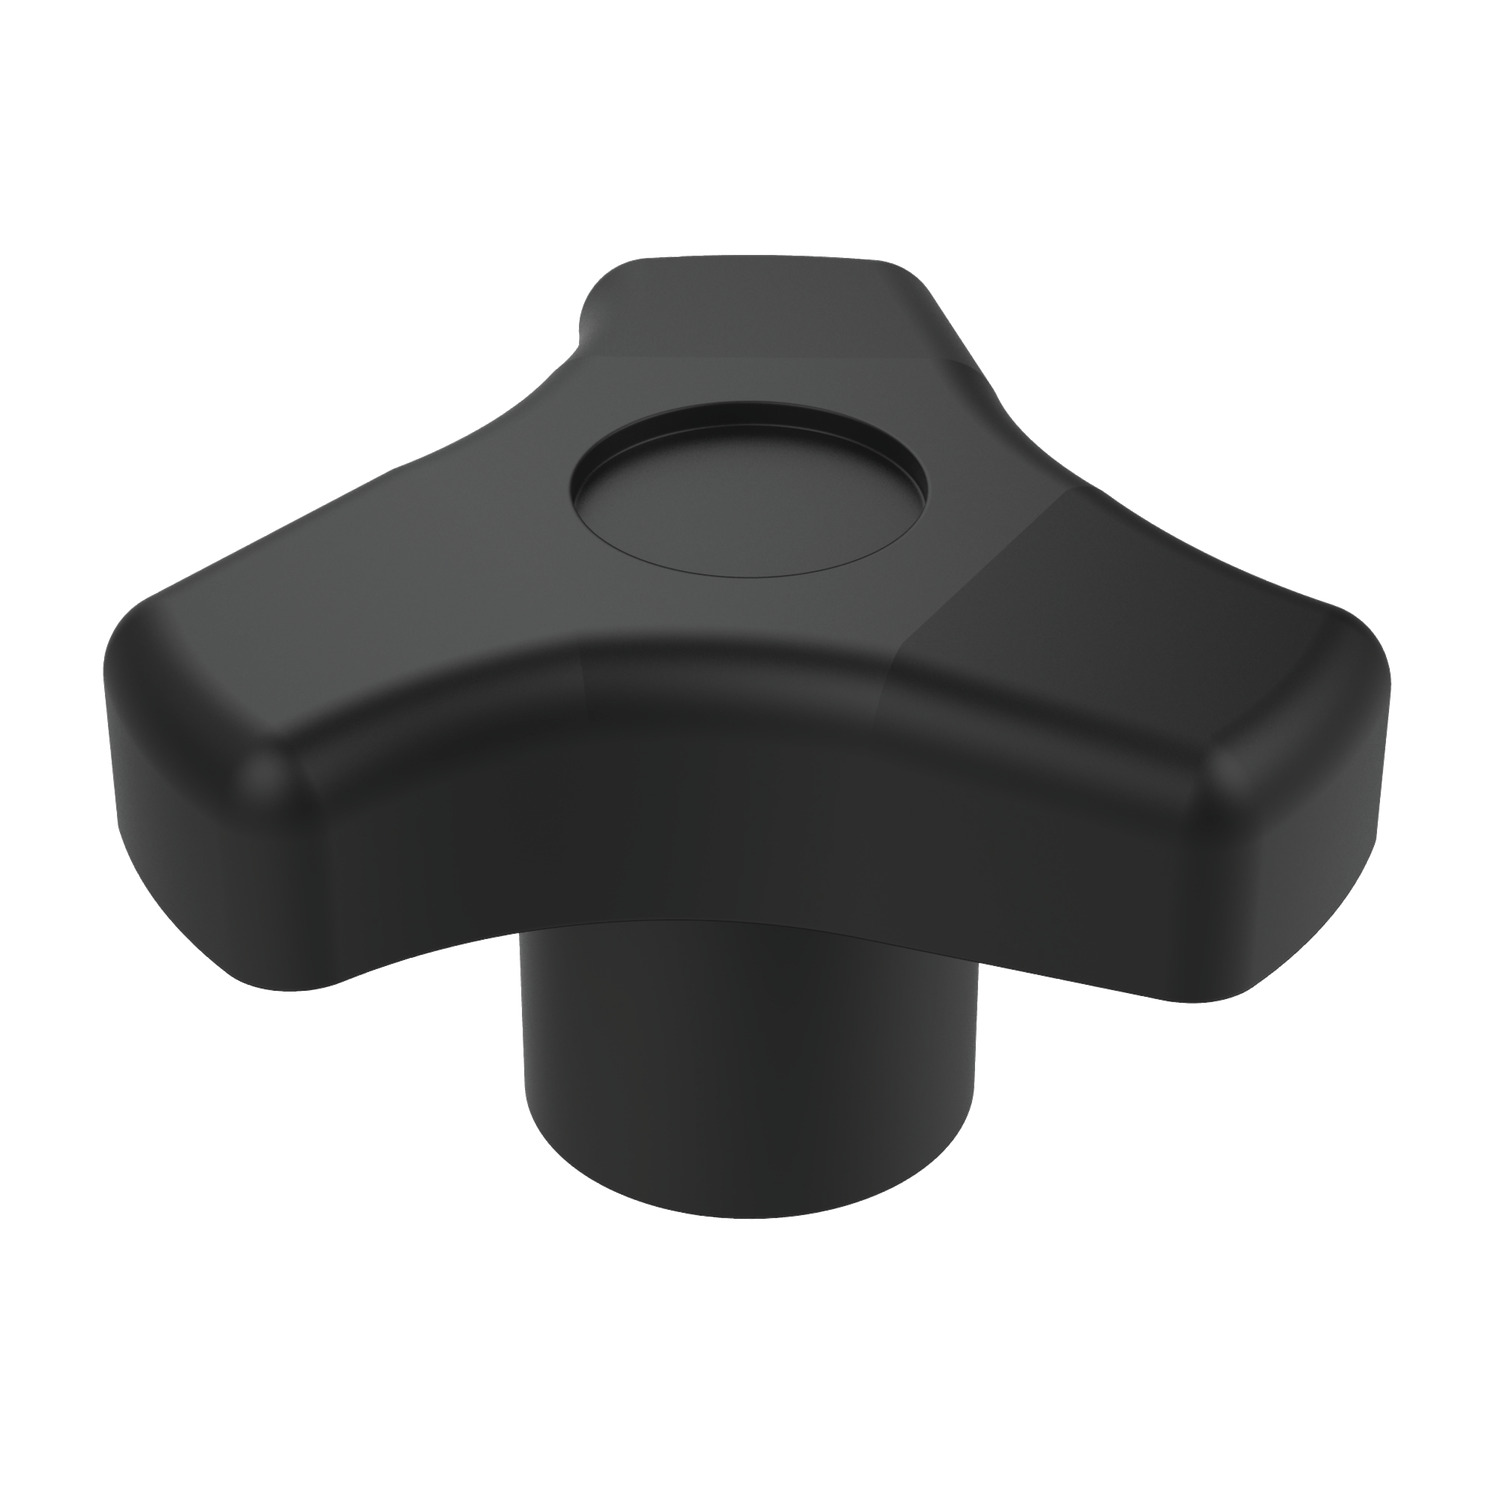 Three Lobed Knobs Matte black plastic three lobed knobs. Available in sizes from M6 to M12. Available from stock.